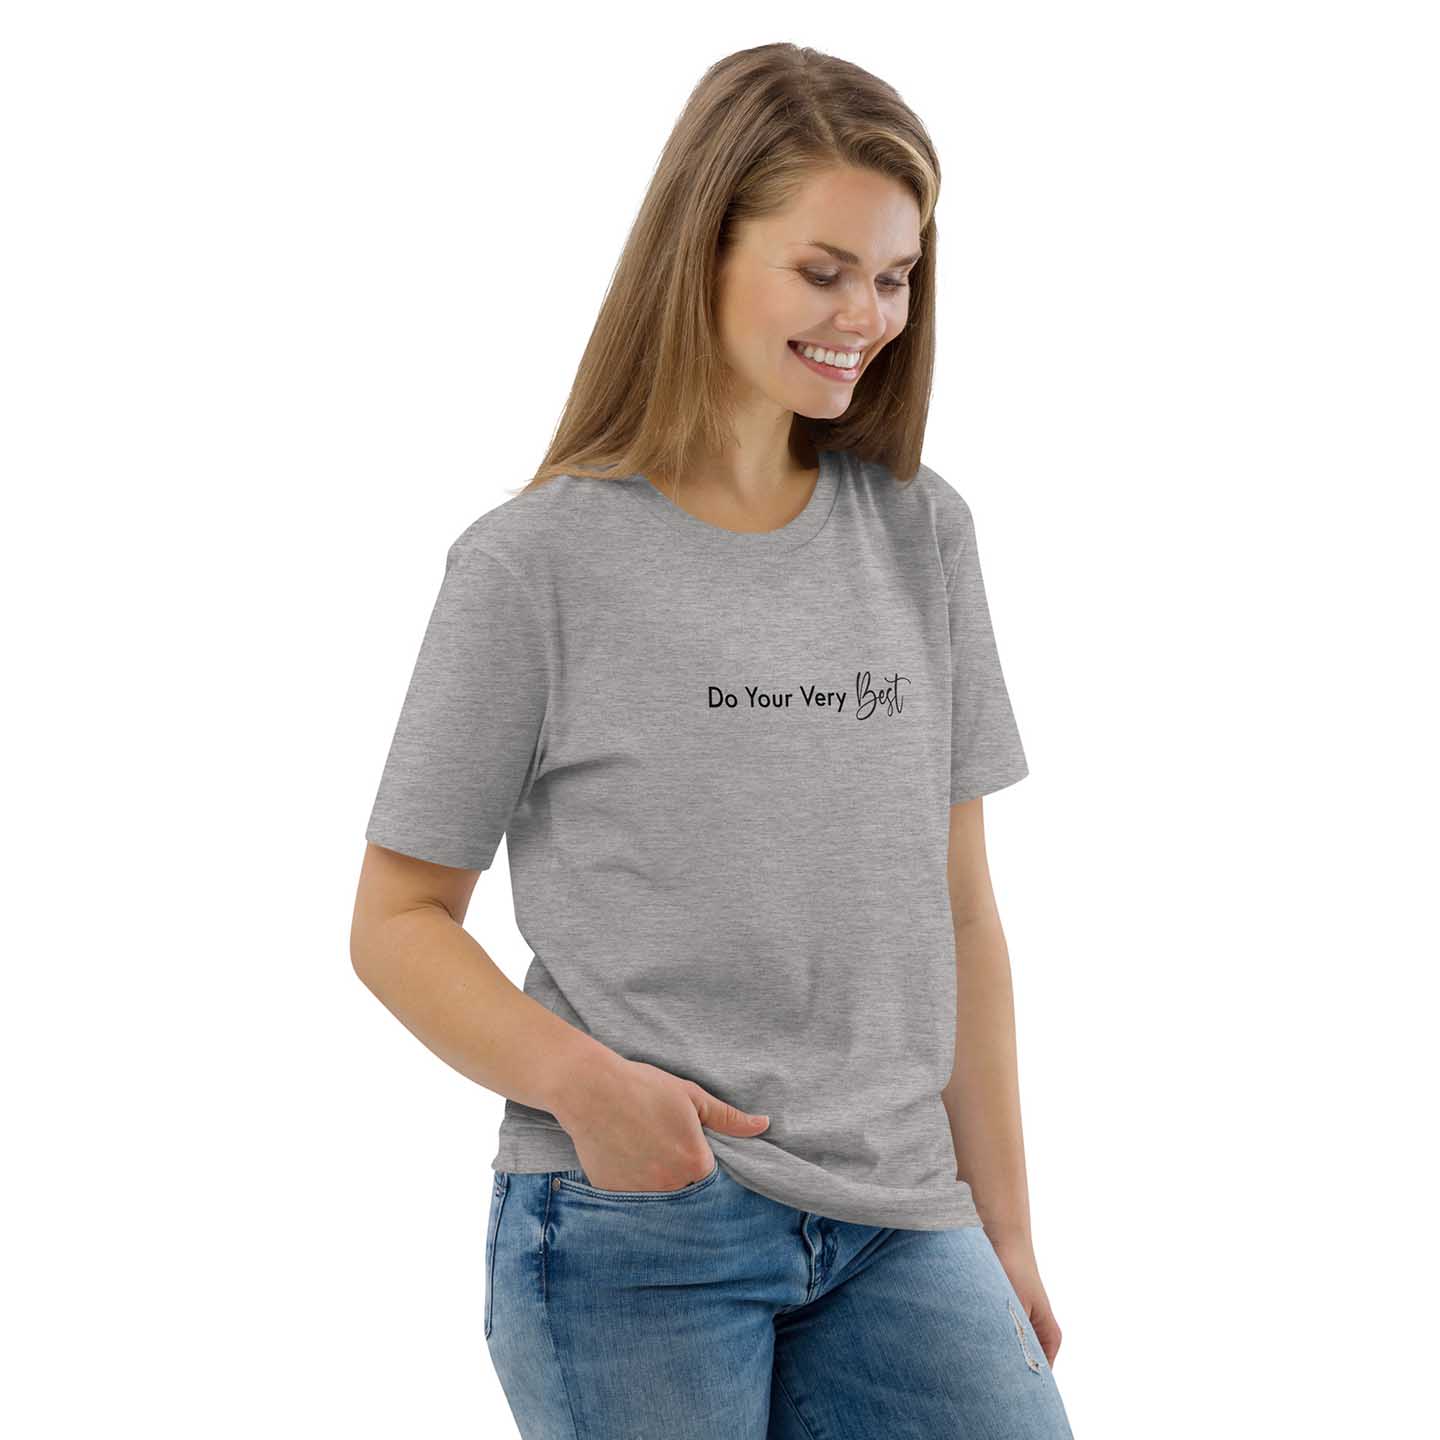 Women gray inspirational t-shirt with motivational quote, "Do Your Very Best."